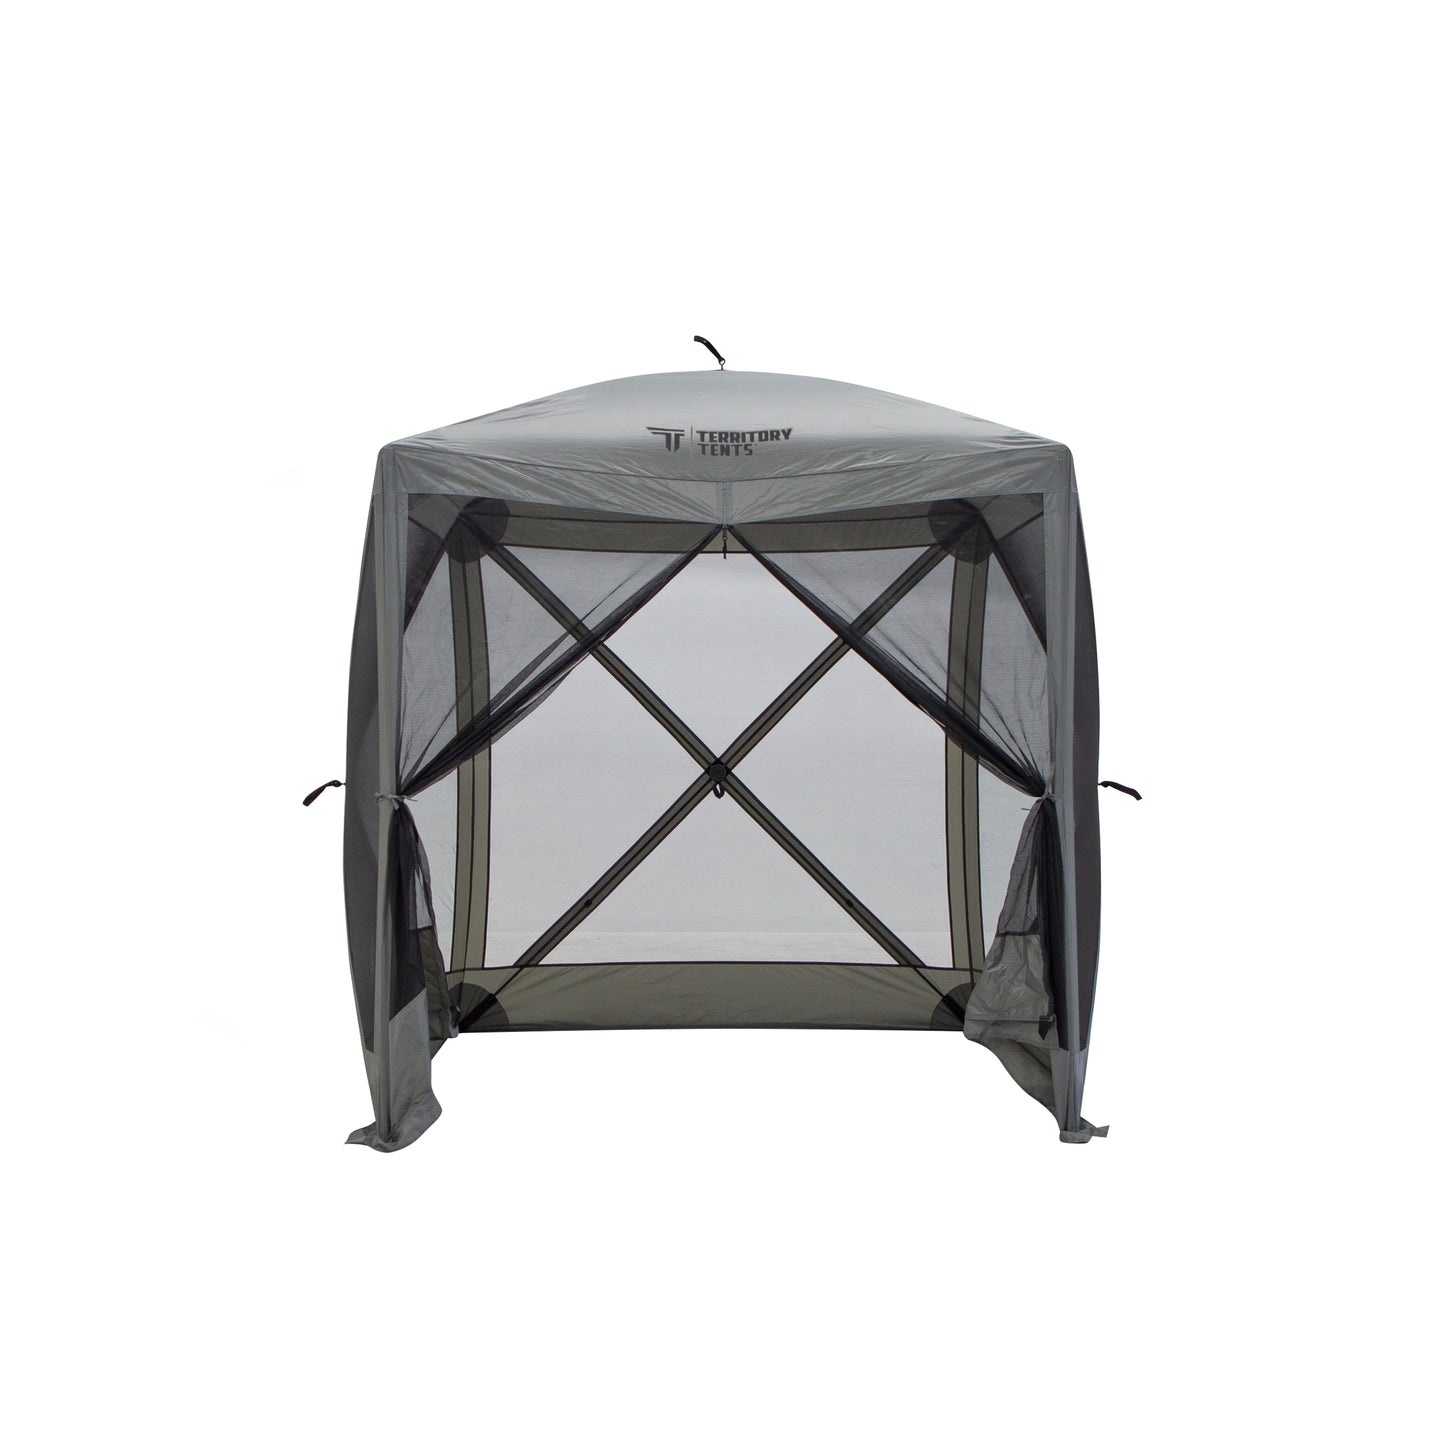 4-SIDED SCREEN TENT